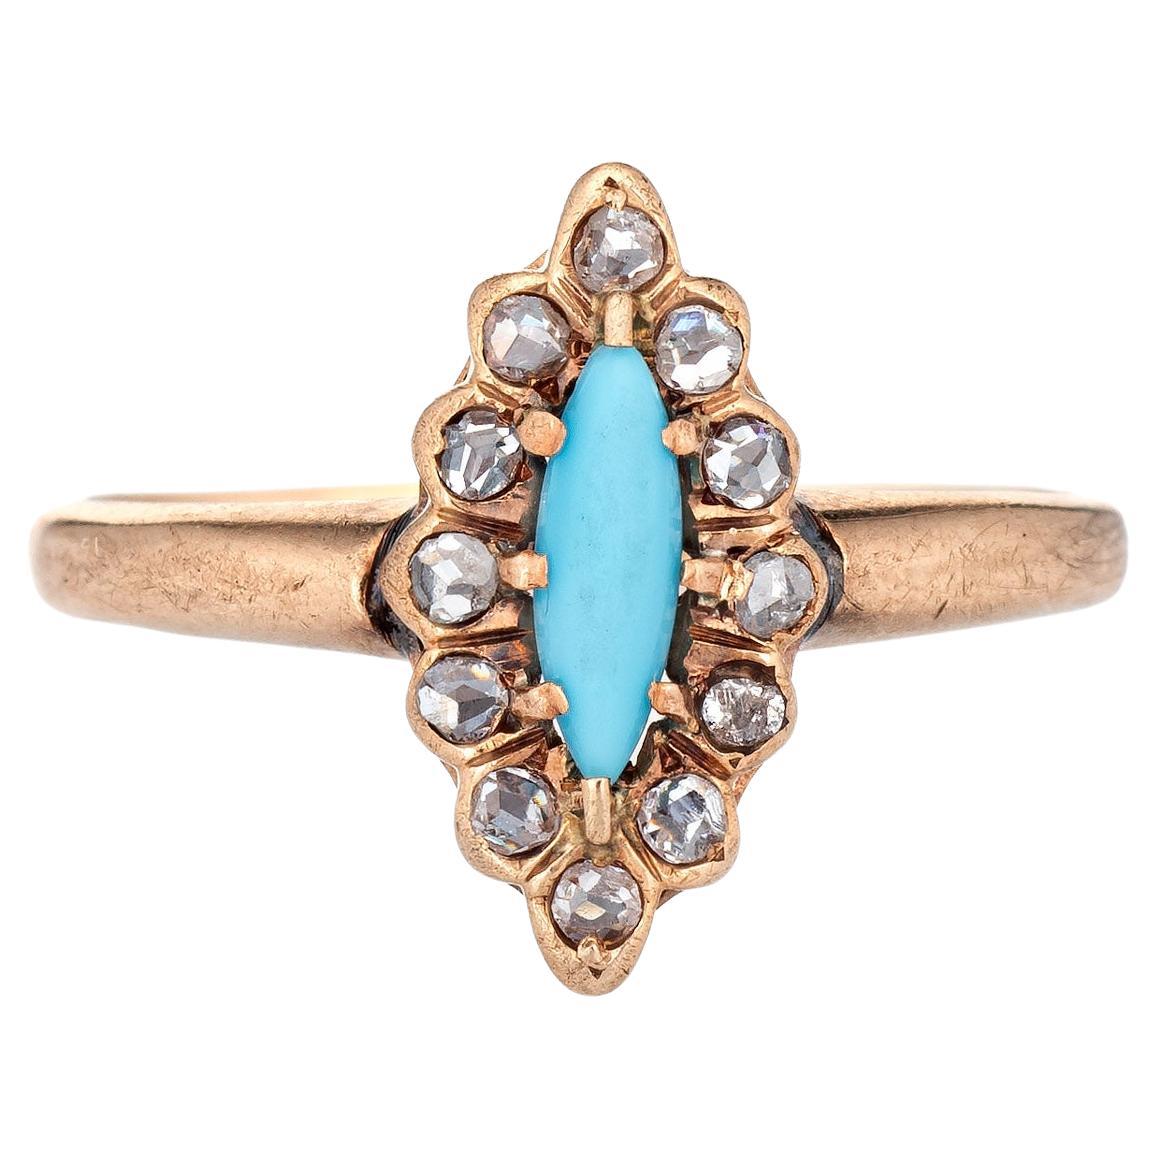 Antique Victorian Navette Ring Old Rose Cut Diamond Turquoise 14k Gold Vintage